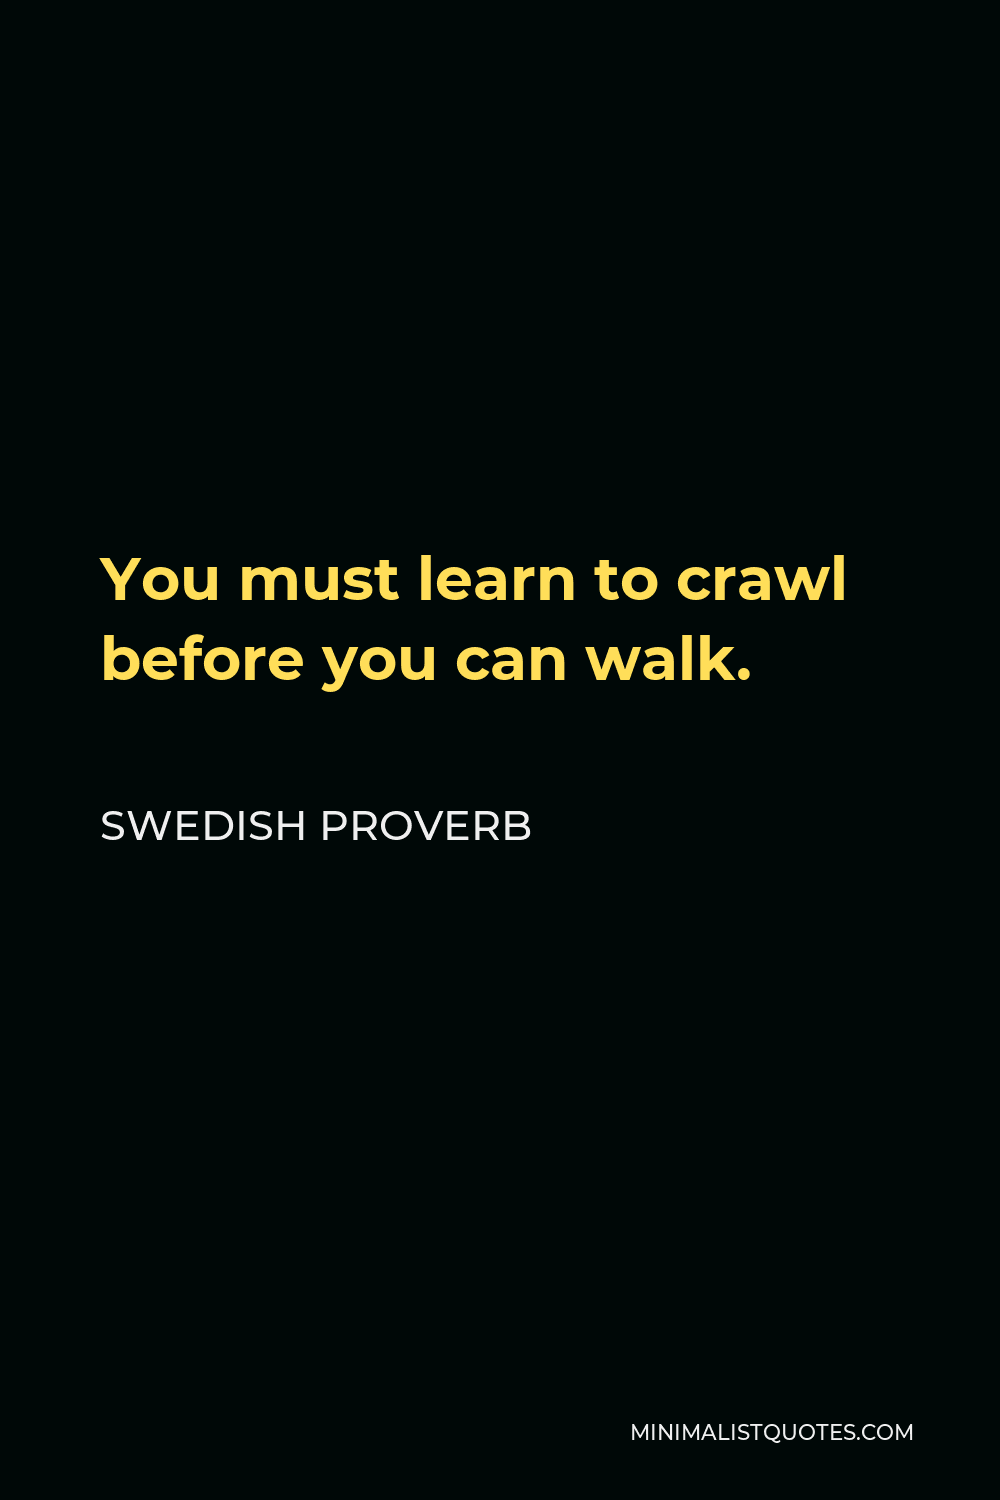 Swedish Proverb Quote - You must learn to crawl before you can walk.